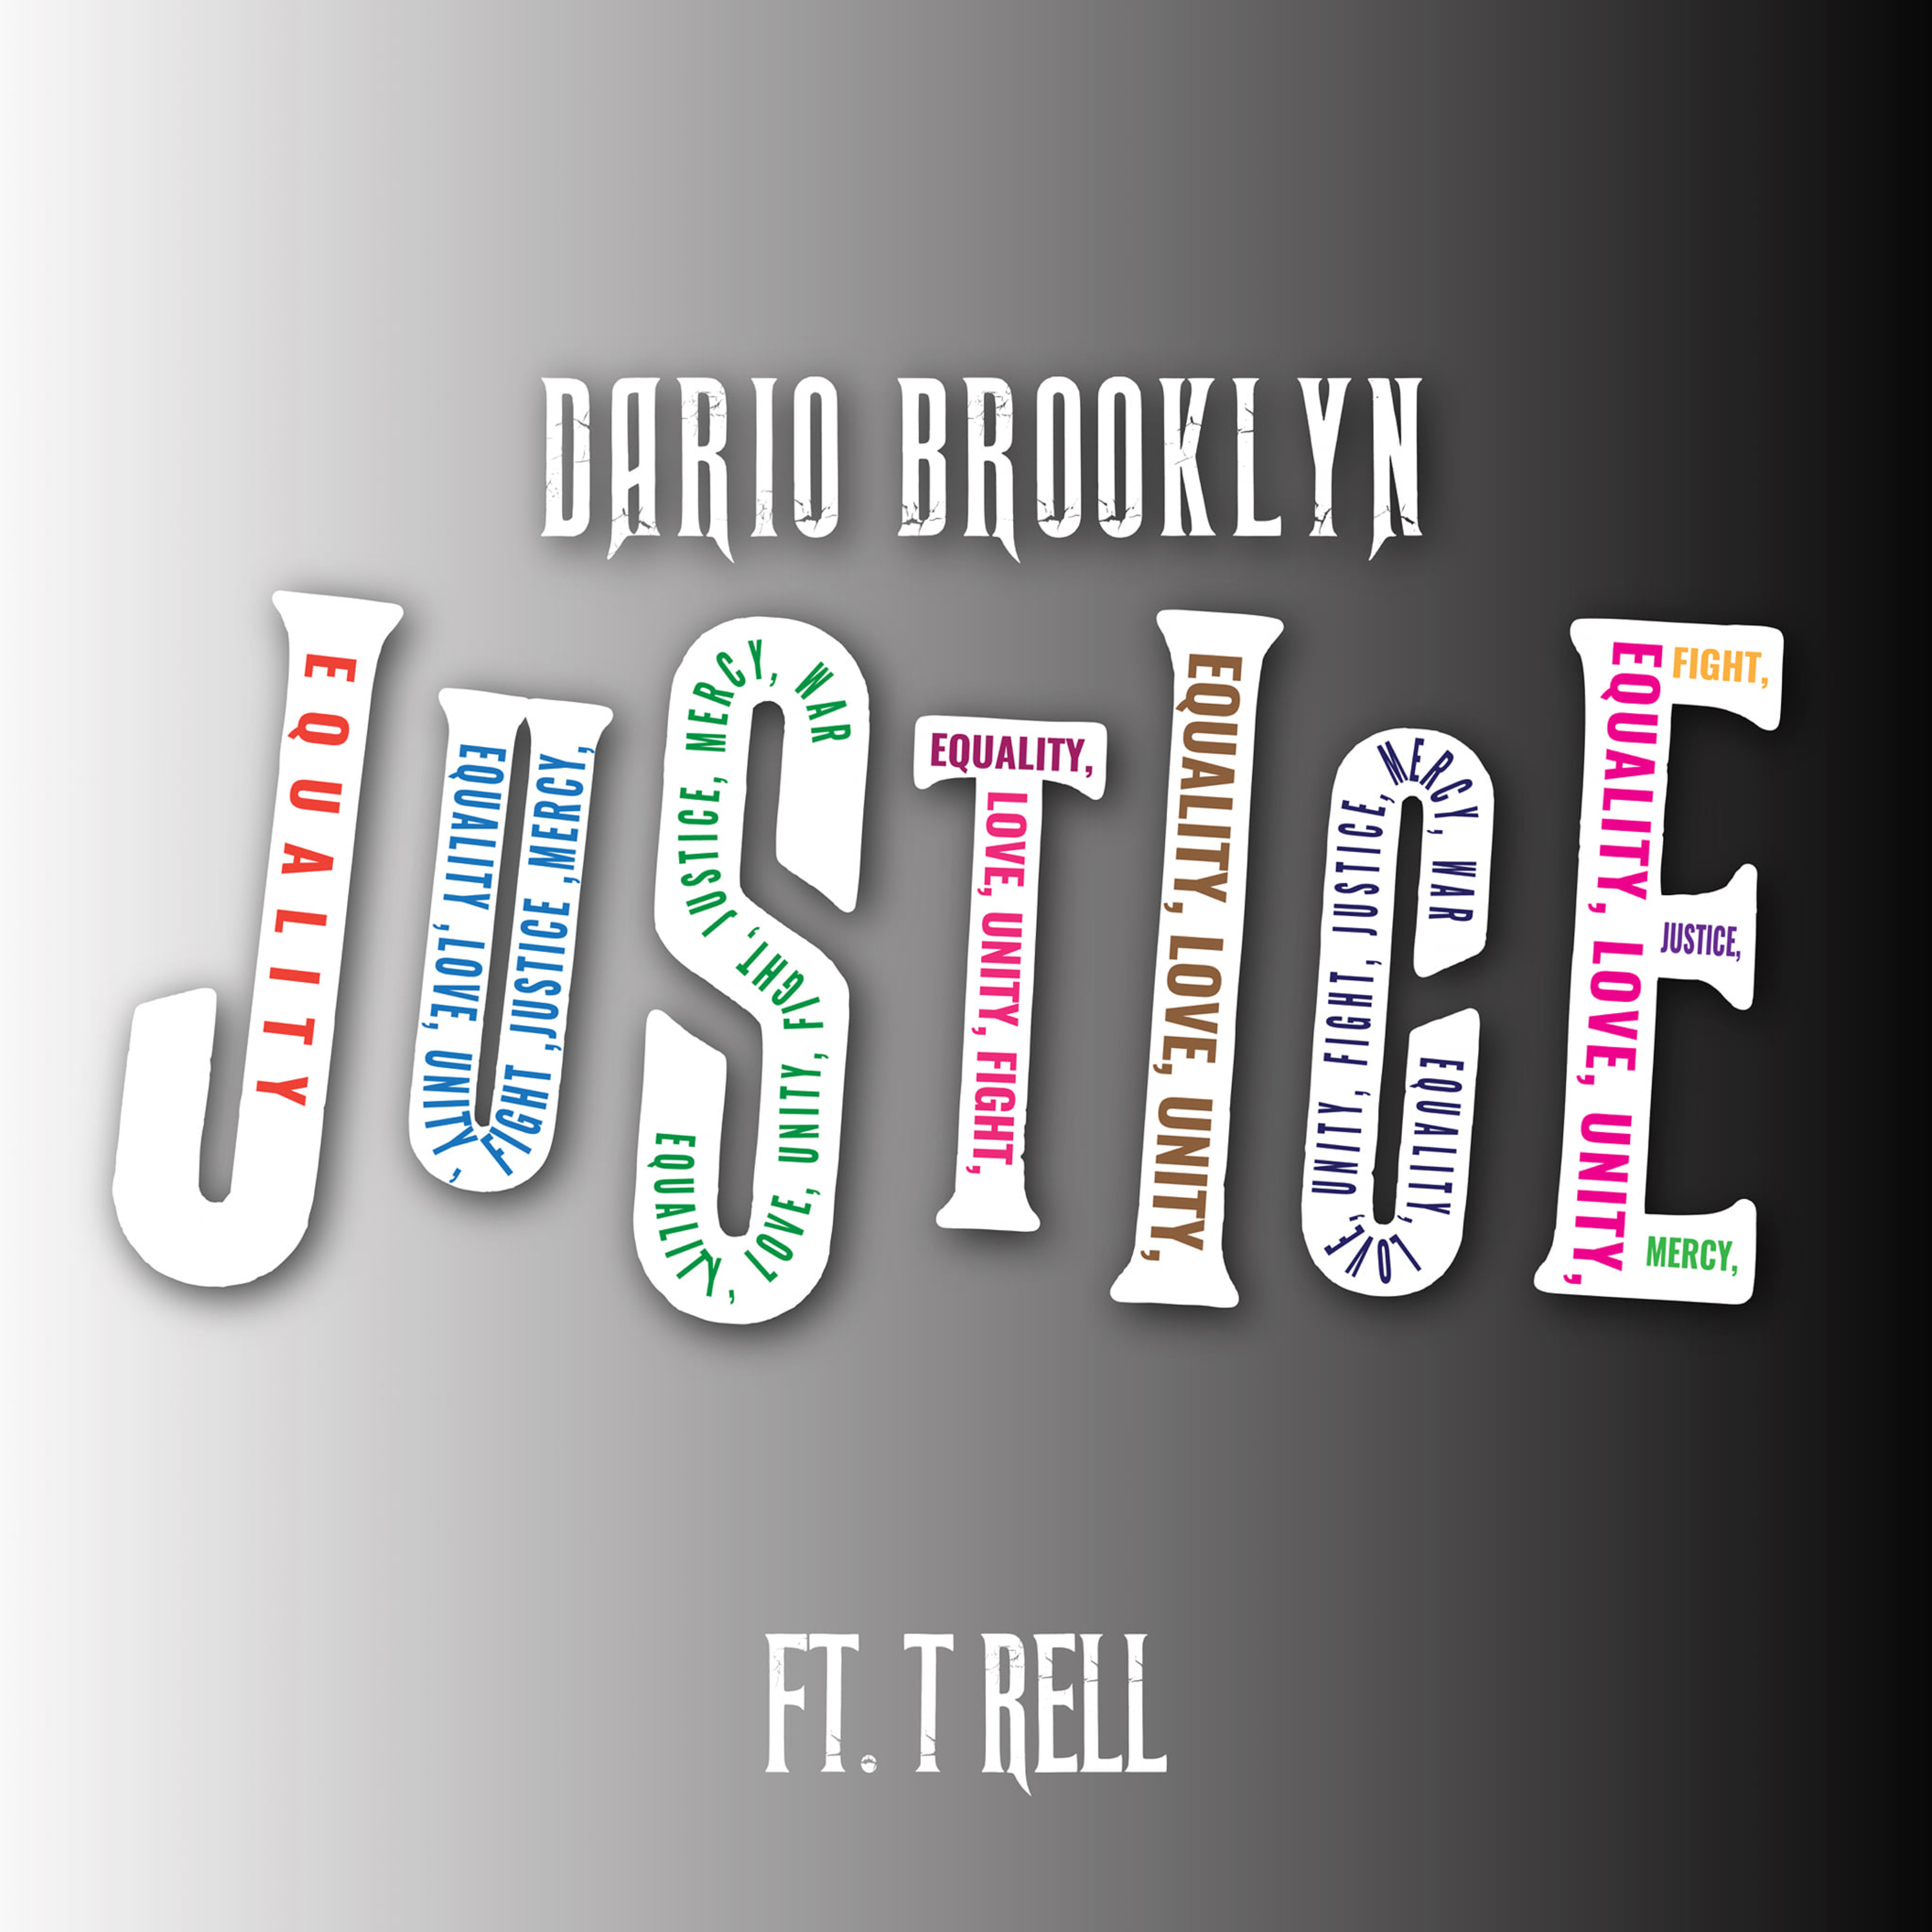 Art for Justice by Dario Brooklyn [feat. T Rell]